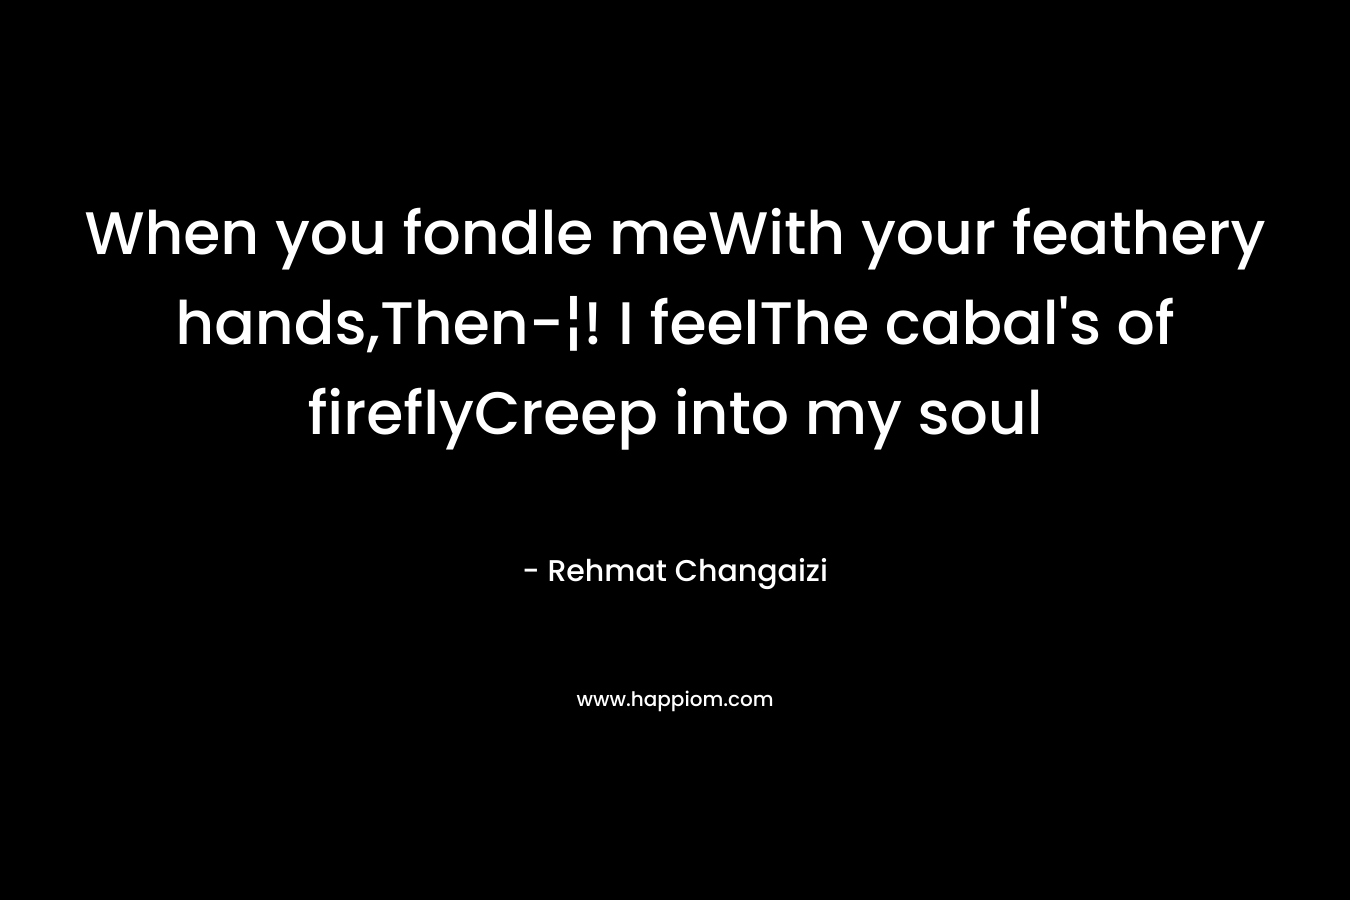 When you fondle meWith your feathery hands,Then-¦! I feelThe cabal’s of fireflyCreep into my soul – Rehmat Changaizi